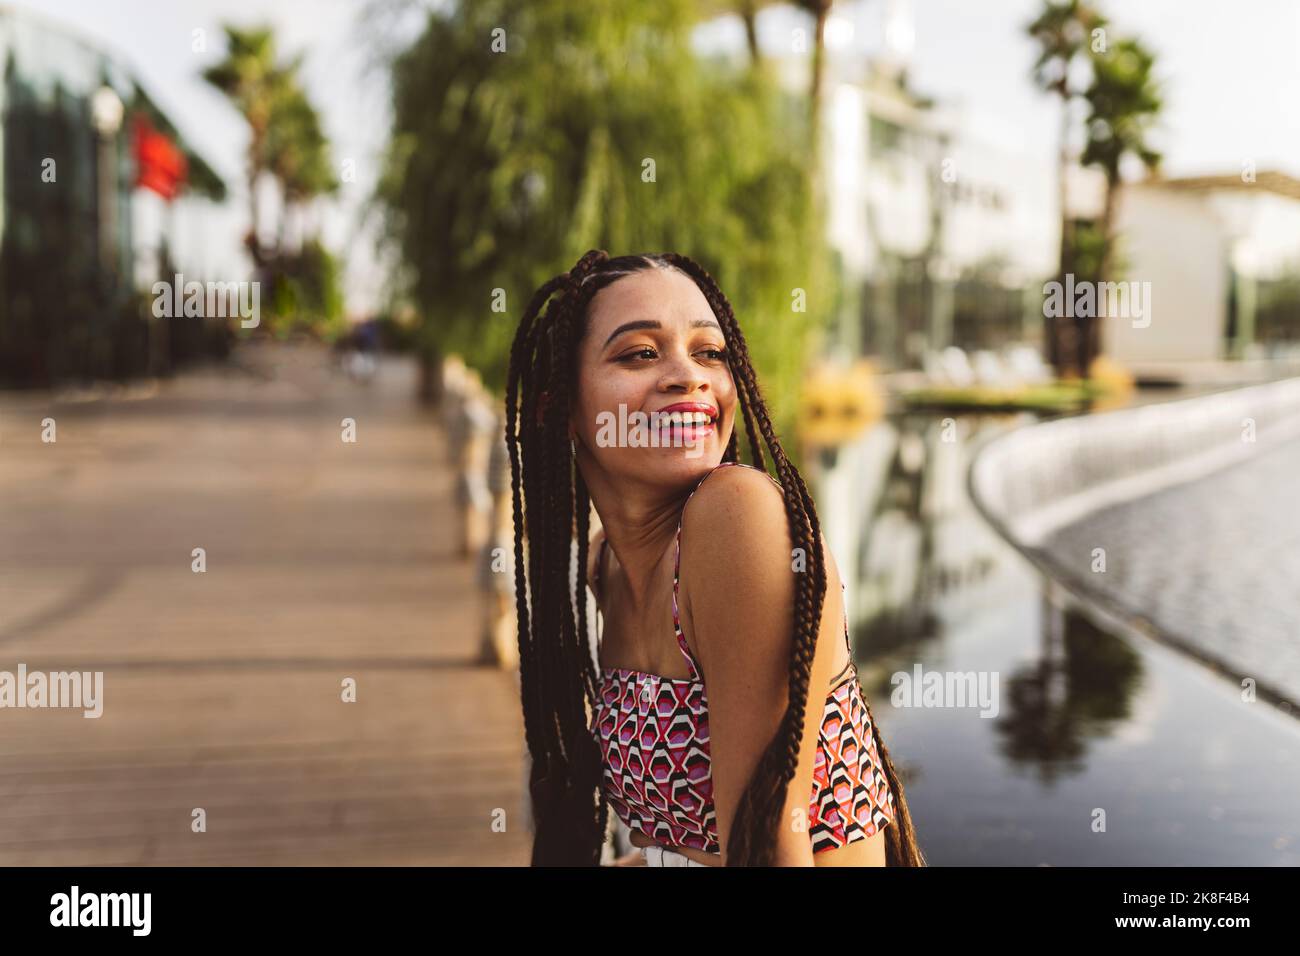 Happy young woman with long braided hair Stock Photo